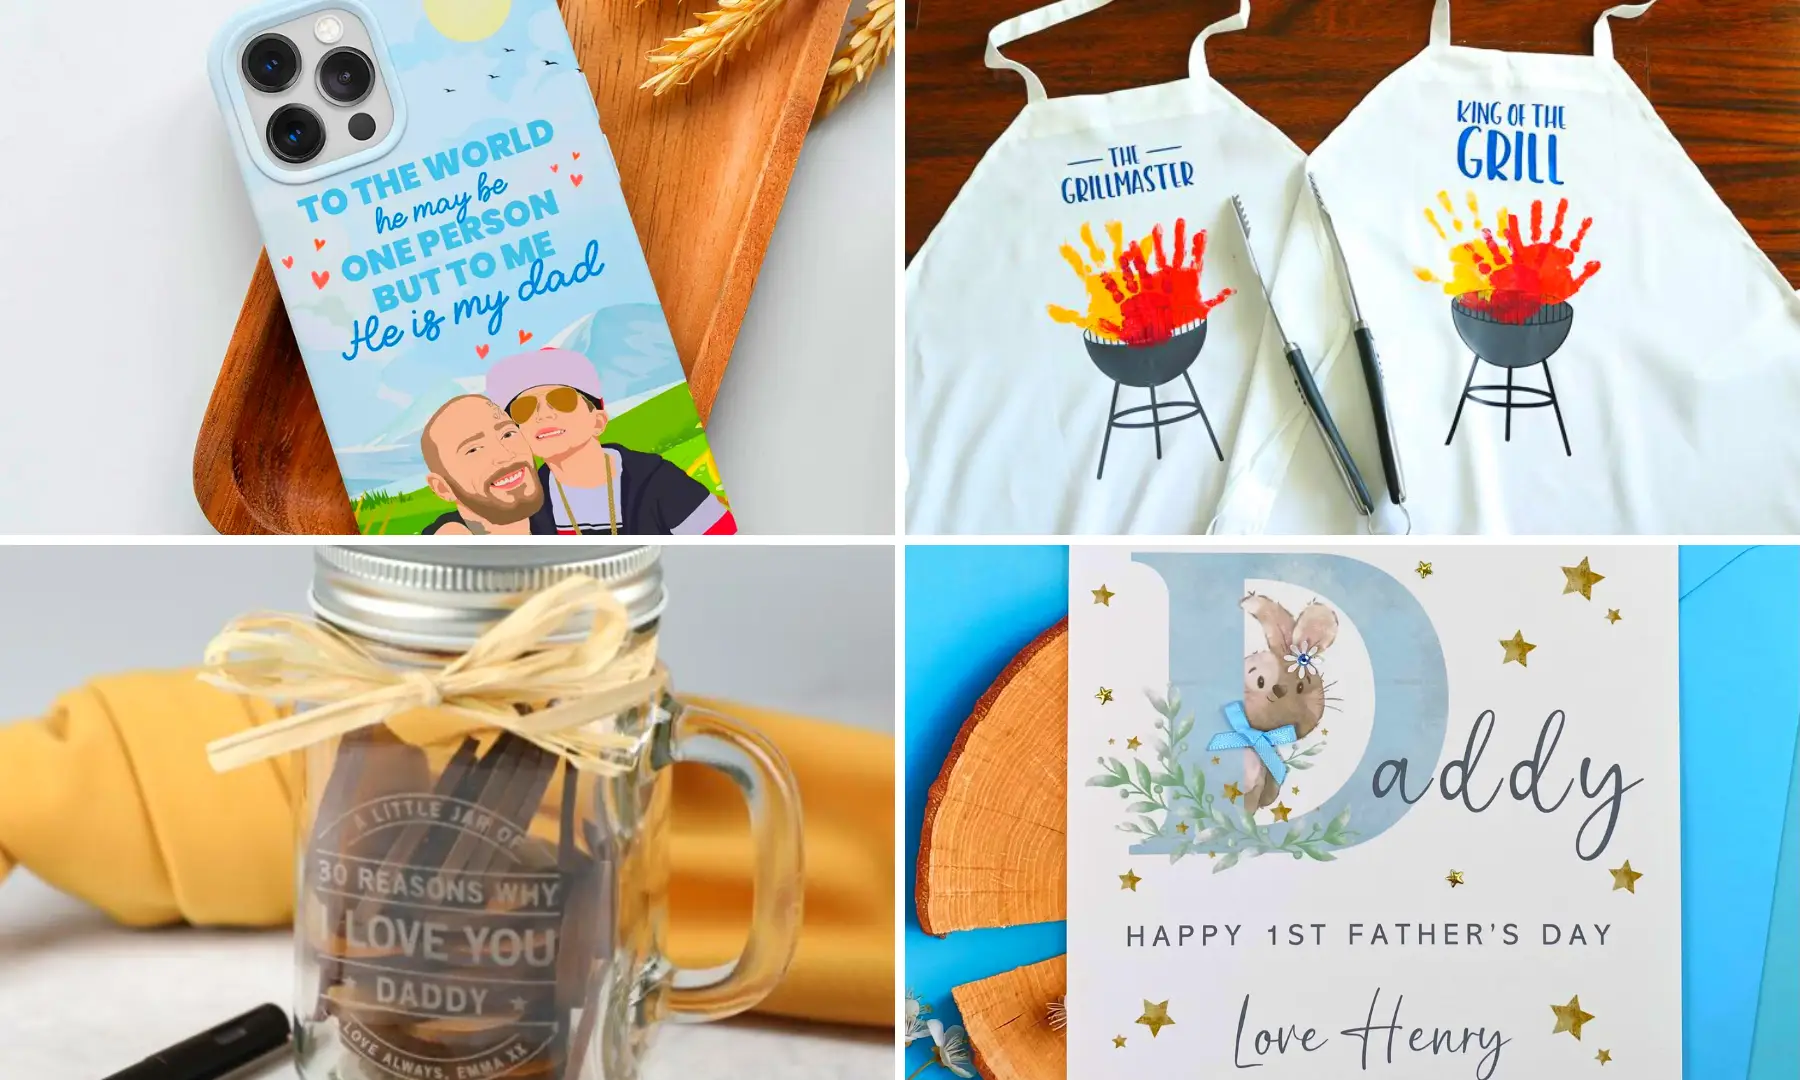 12 Sentimental Homemade Christmas Gifts from Kids - The Crazy Craft Lady